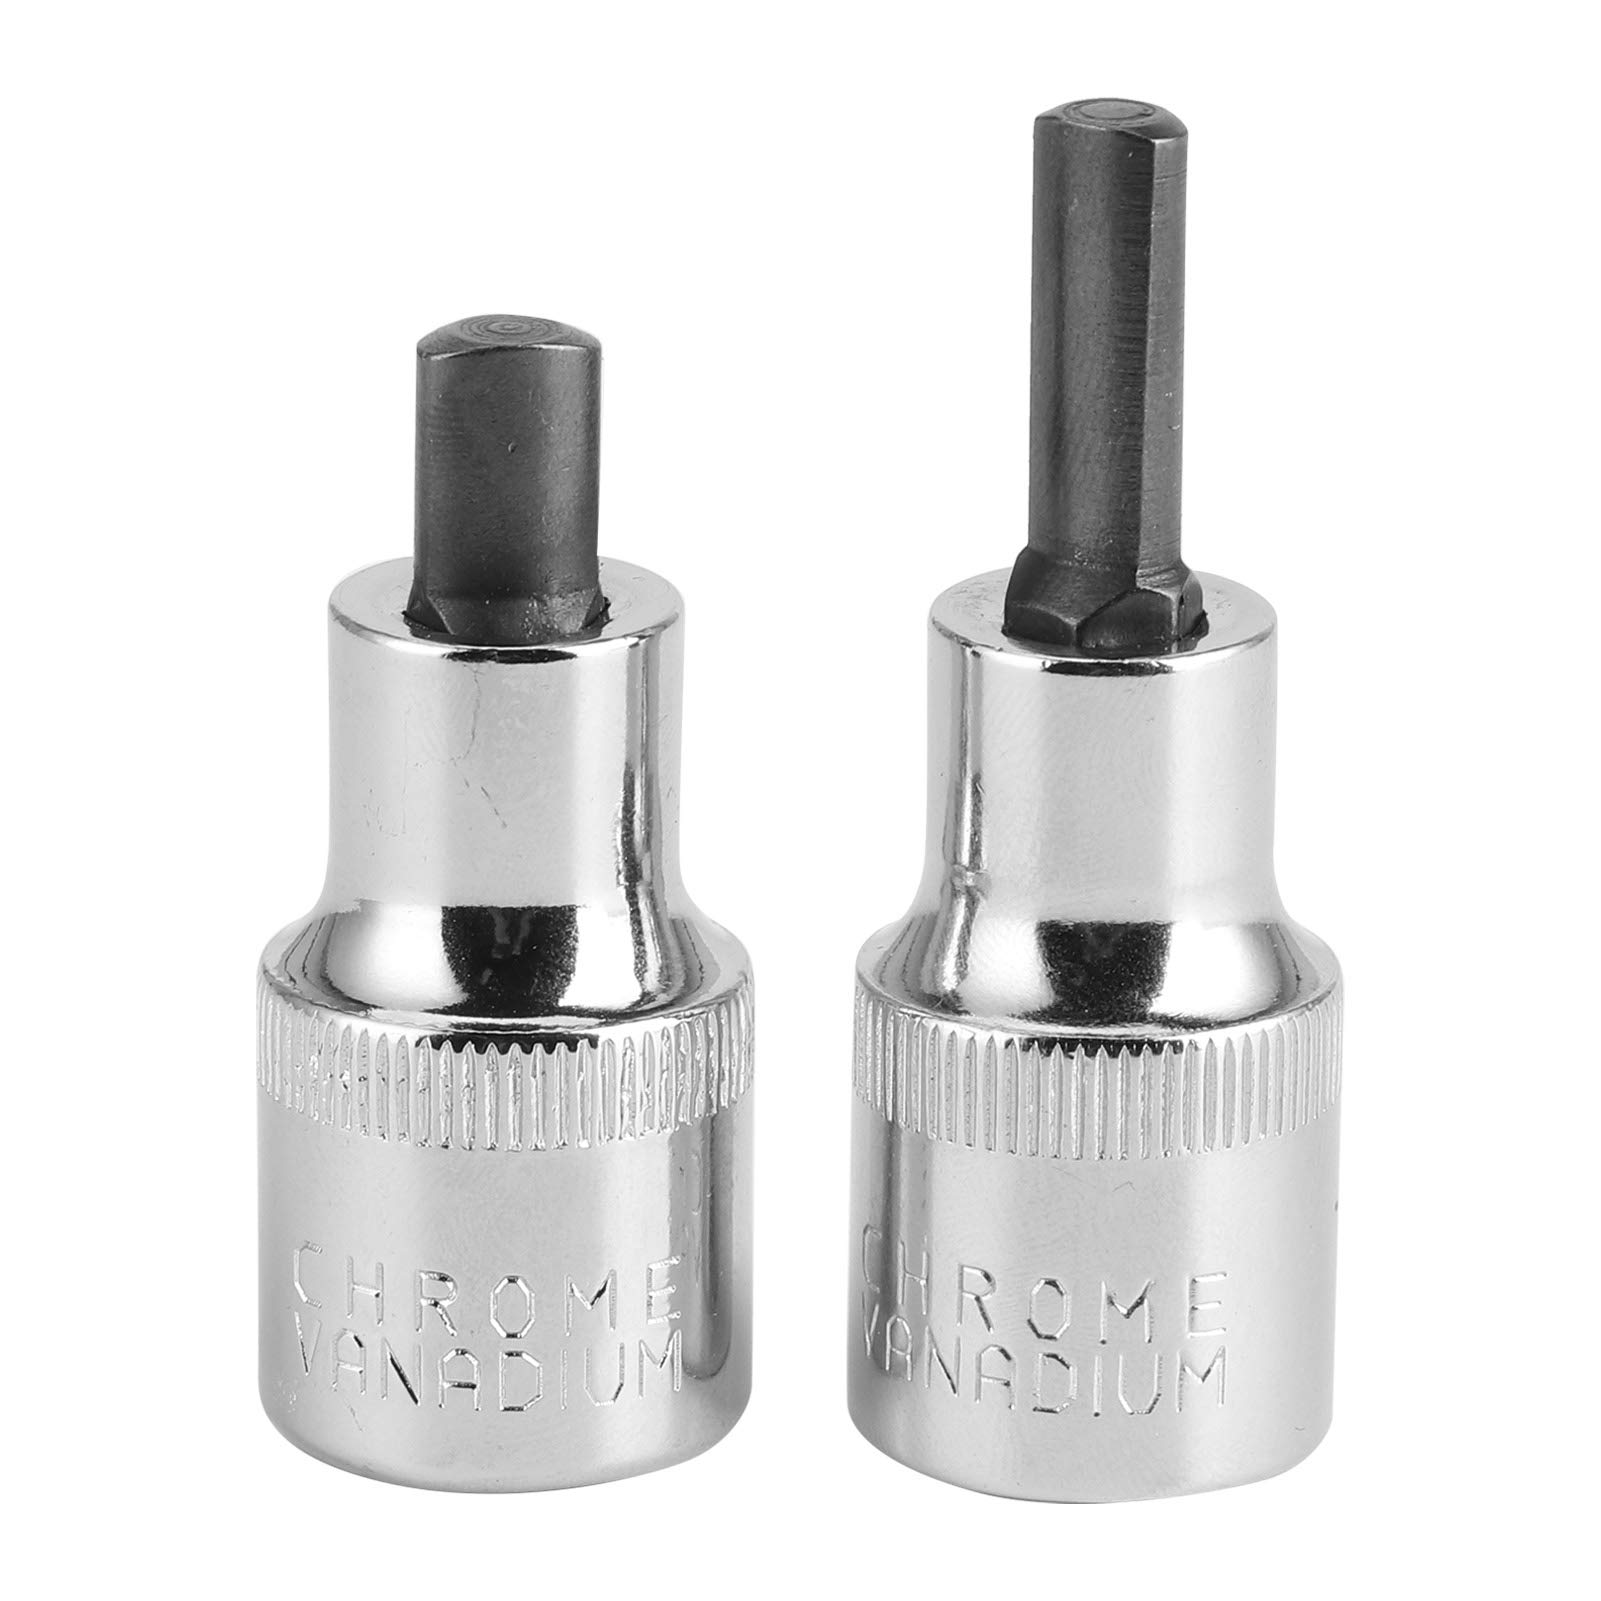 Strut Leg Pry Socket, 2Pcs 1/2in Square Drive Strut And Nut Hub Clamp Spreader Remover Tool von aqxreight